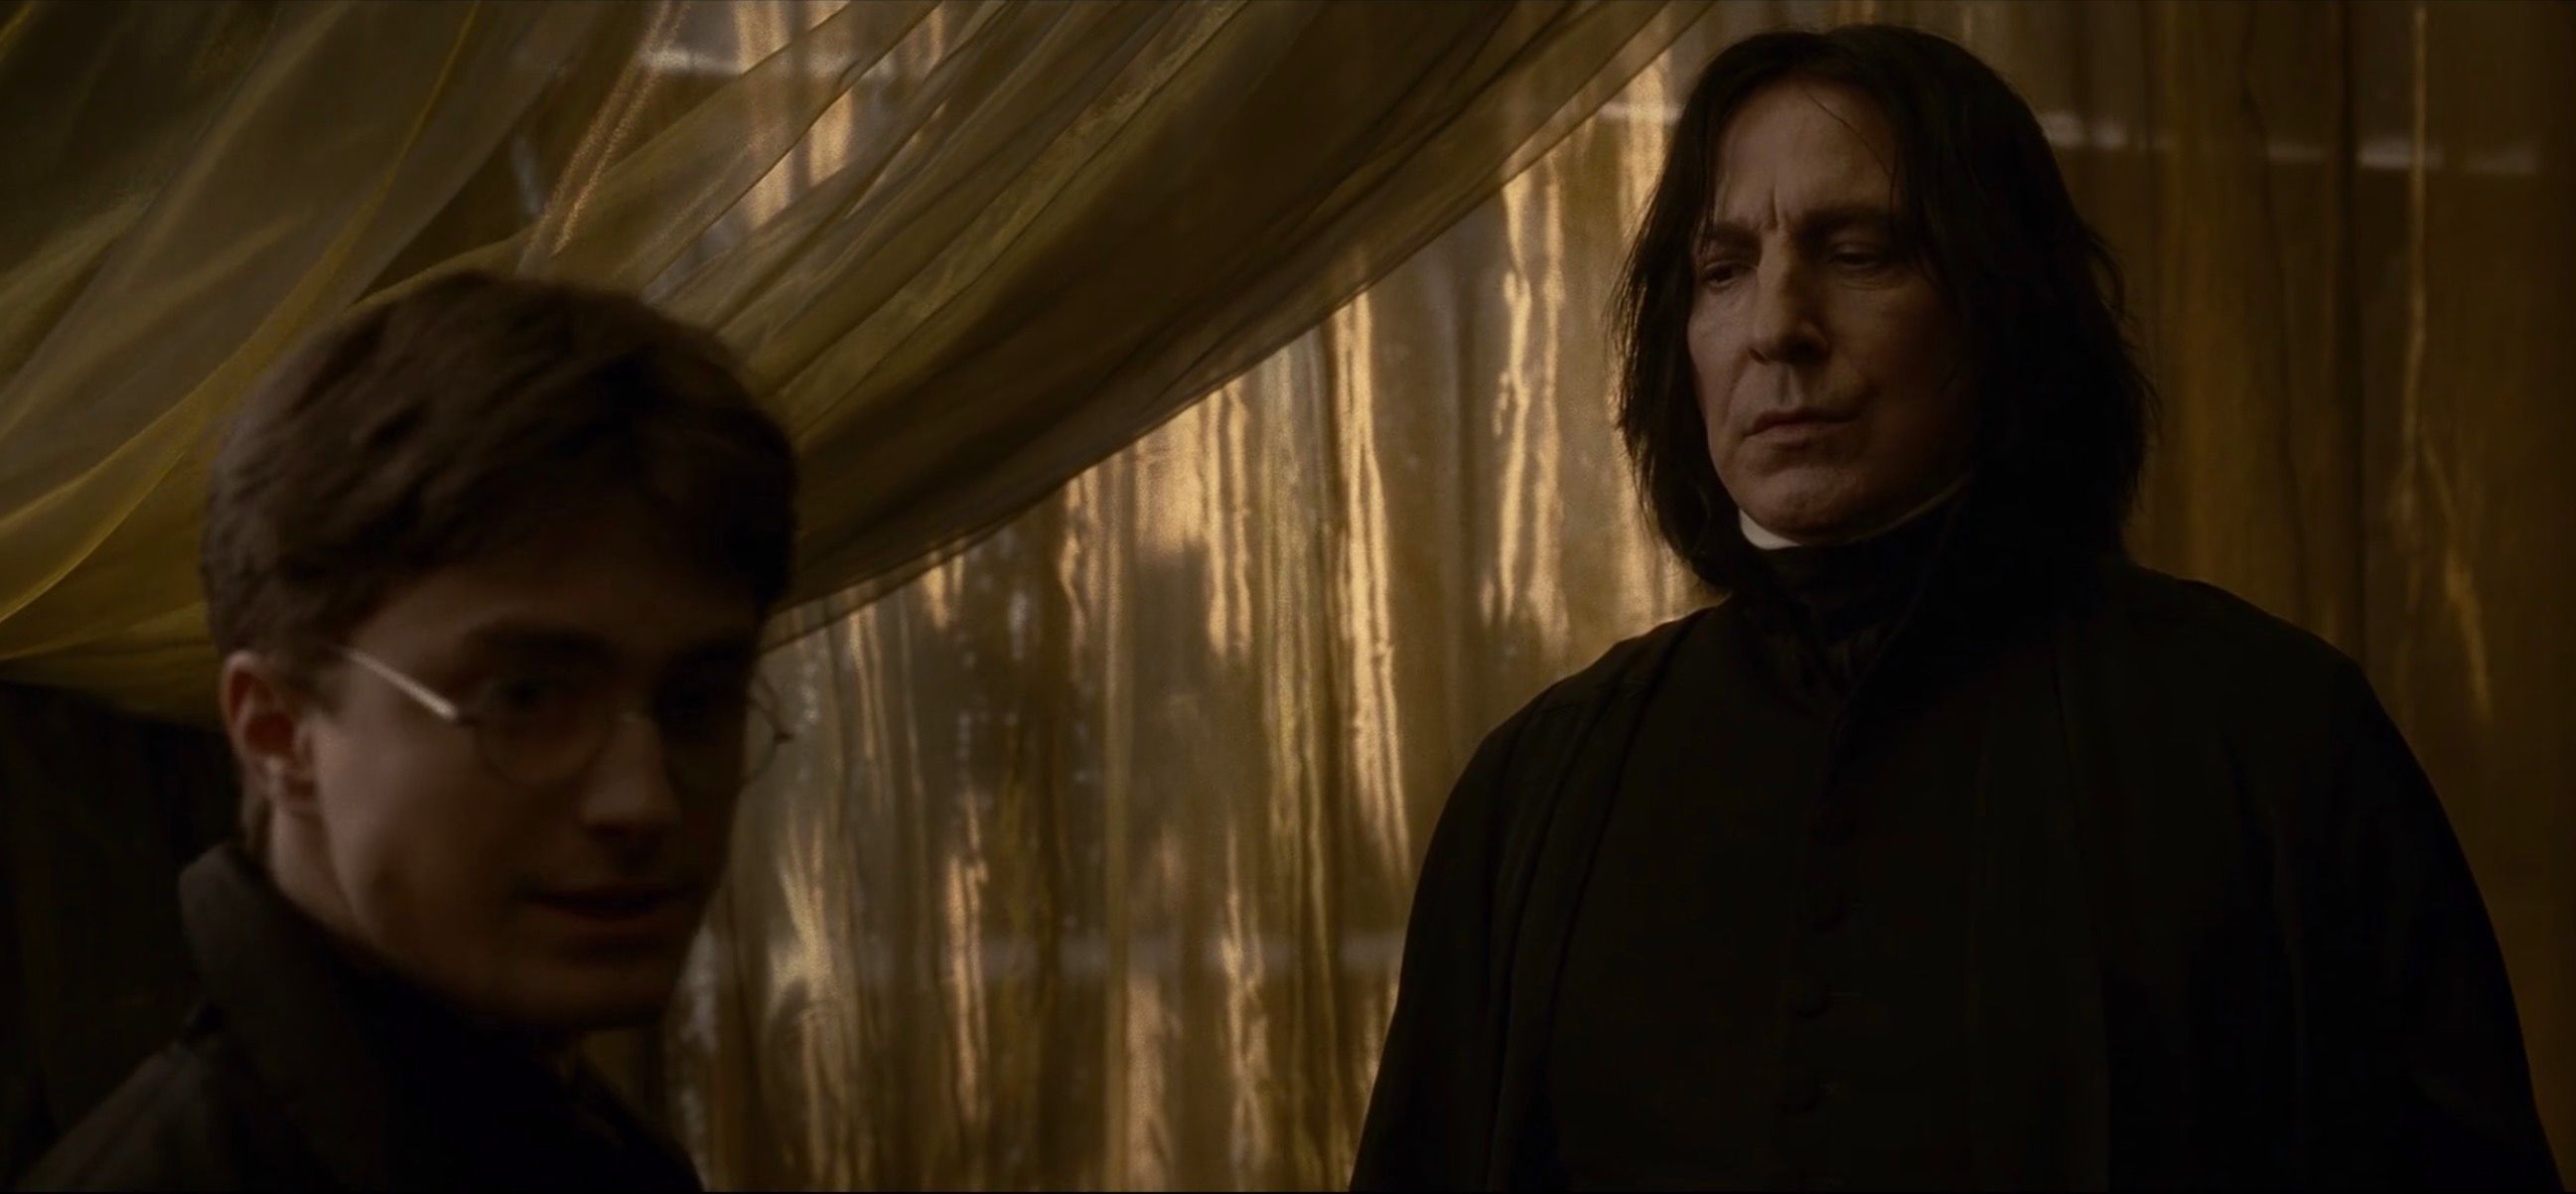 Alan Rickman as Snape and Daniel Radcliffe as Harry Potter